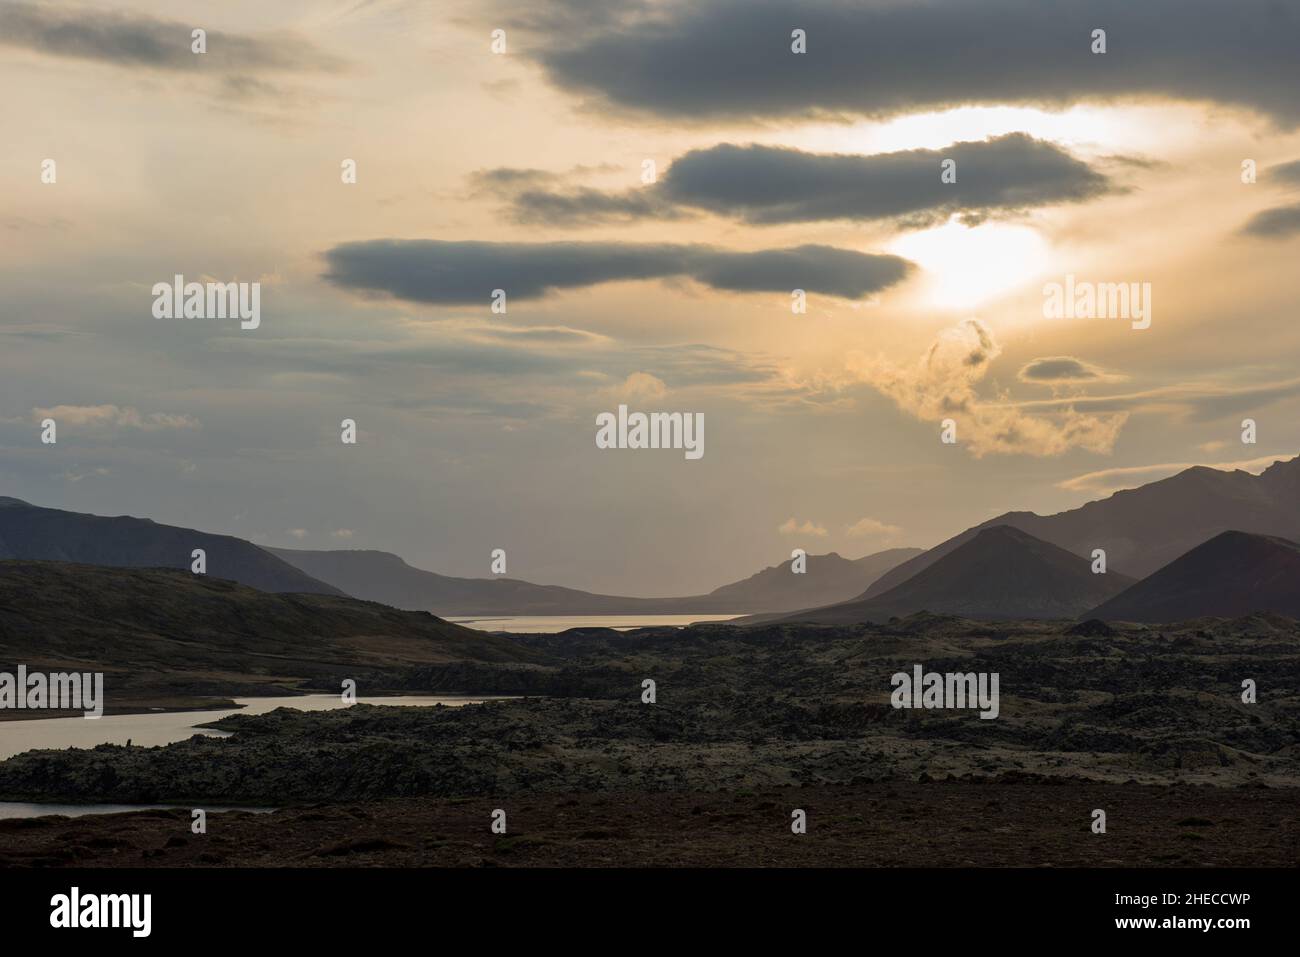 Volcanic landscape with river in Iceland in sunset lights Stock Photo